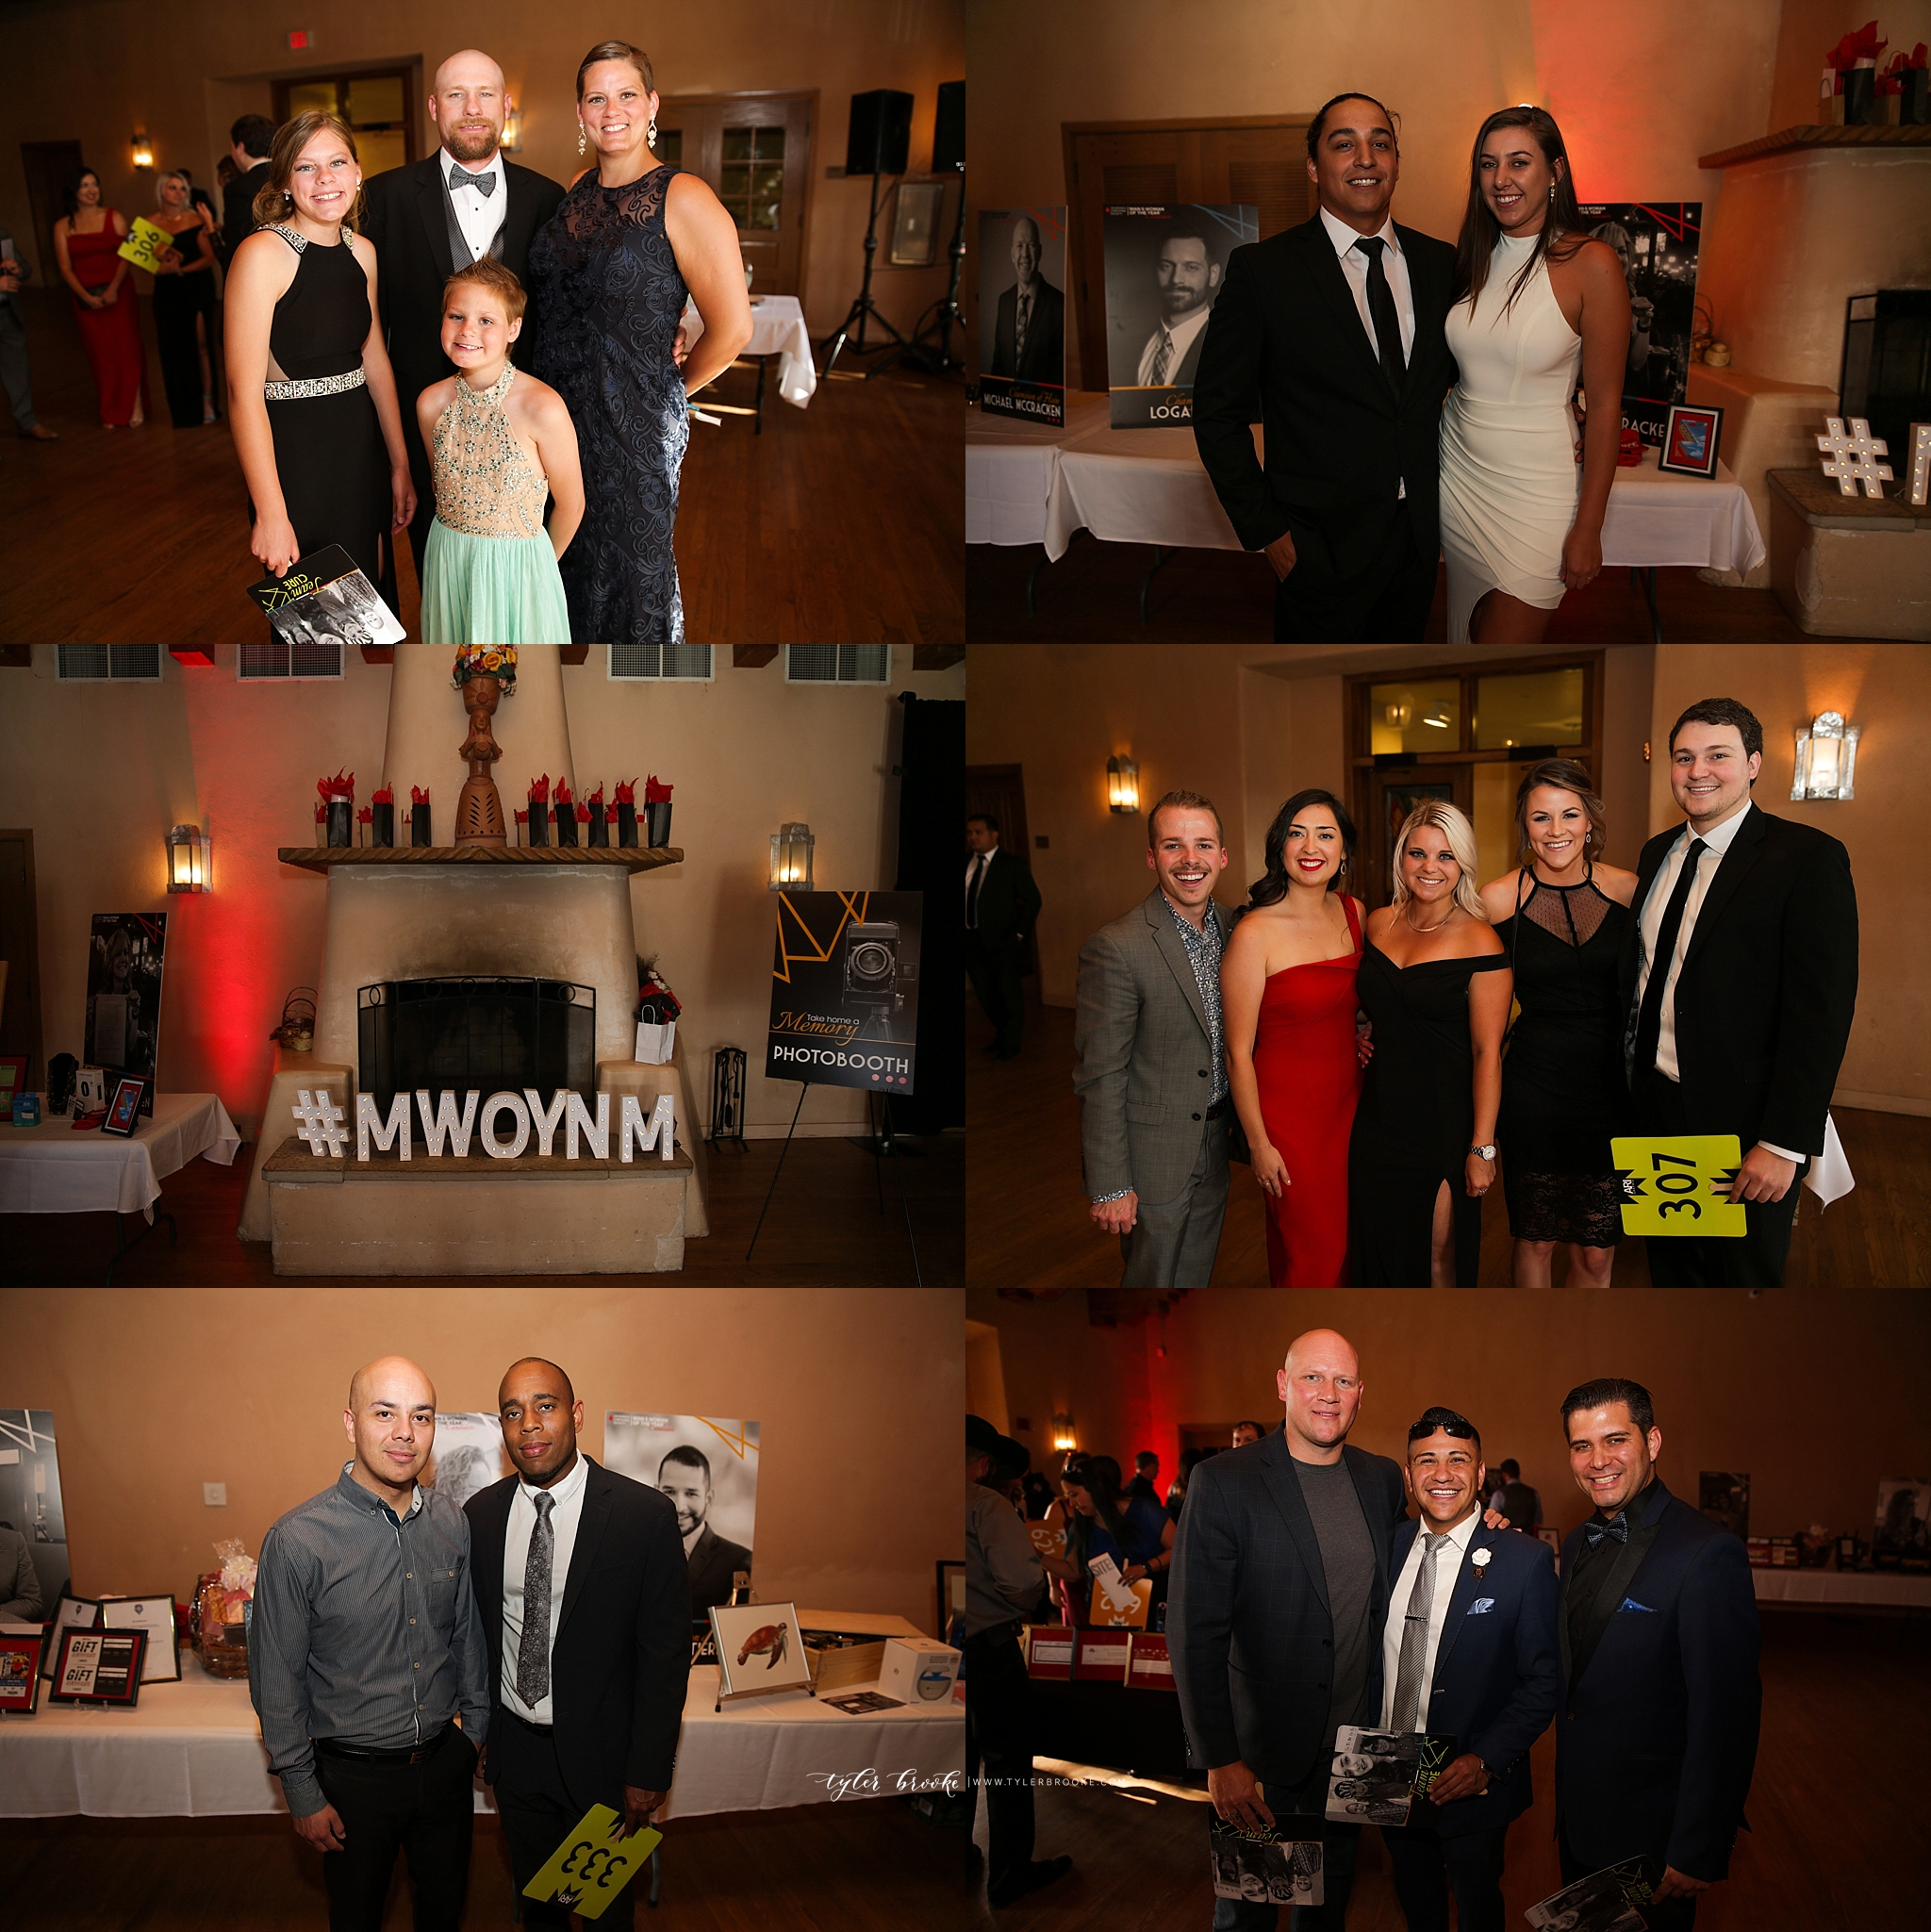 Albuquerque event photographer​,​ birthday party photographers​,​ milestone photographers​,​ family reunion​,​ company event photography​,​ tanoan parties​,​ charity events​,​ hispanic cultural center albuquerque event​,​ fundraiser events​,​ fundraising photographer​,​ gala photographer​,​ corporate event photographers albuquerque​,​ New Mexico​,​ group photos​,​ outdoor events in abq​,​ silent auction